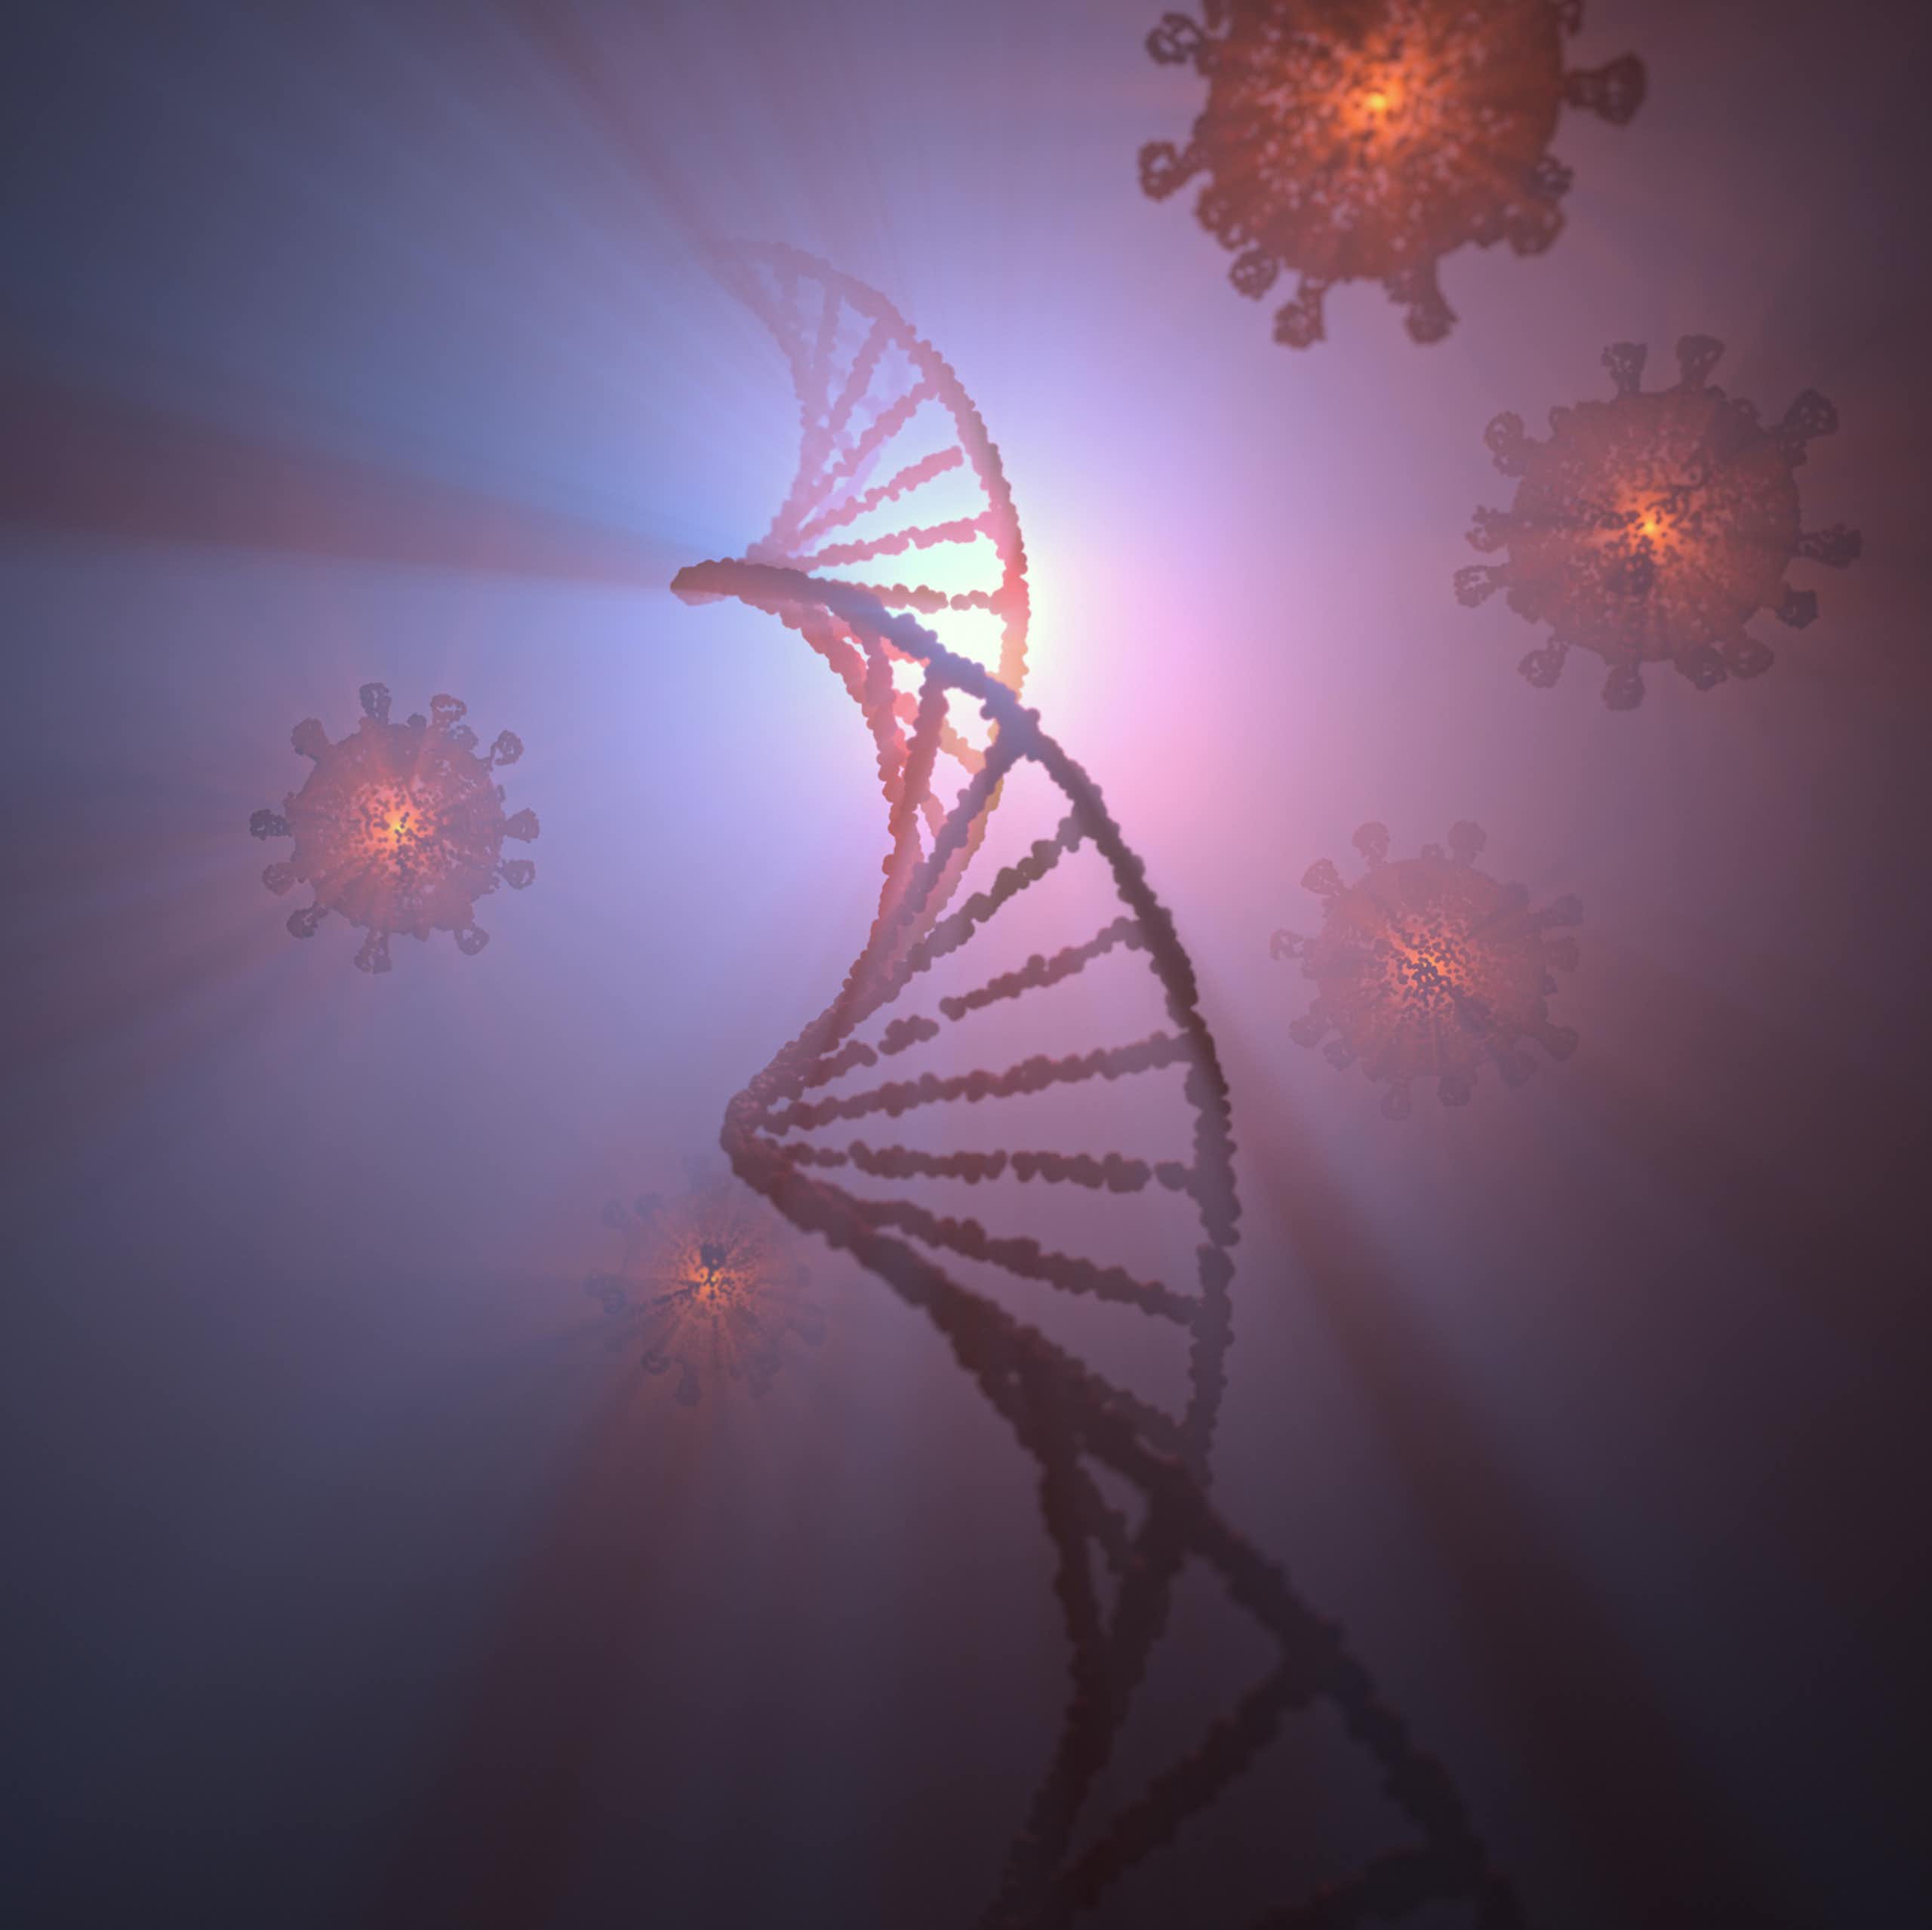  Illustration of DNA helix stretching up into an opaque light as virus particles float around it